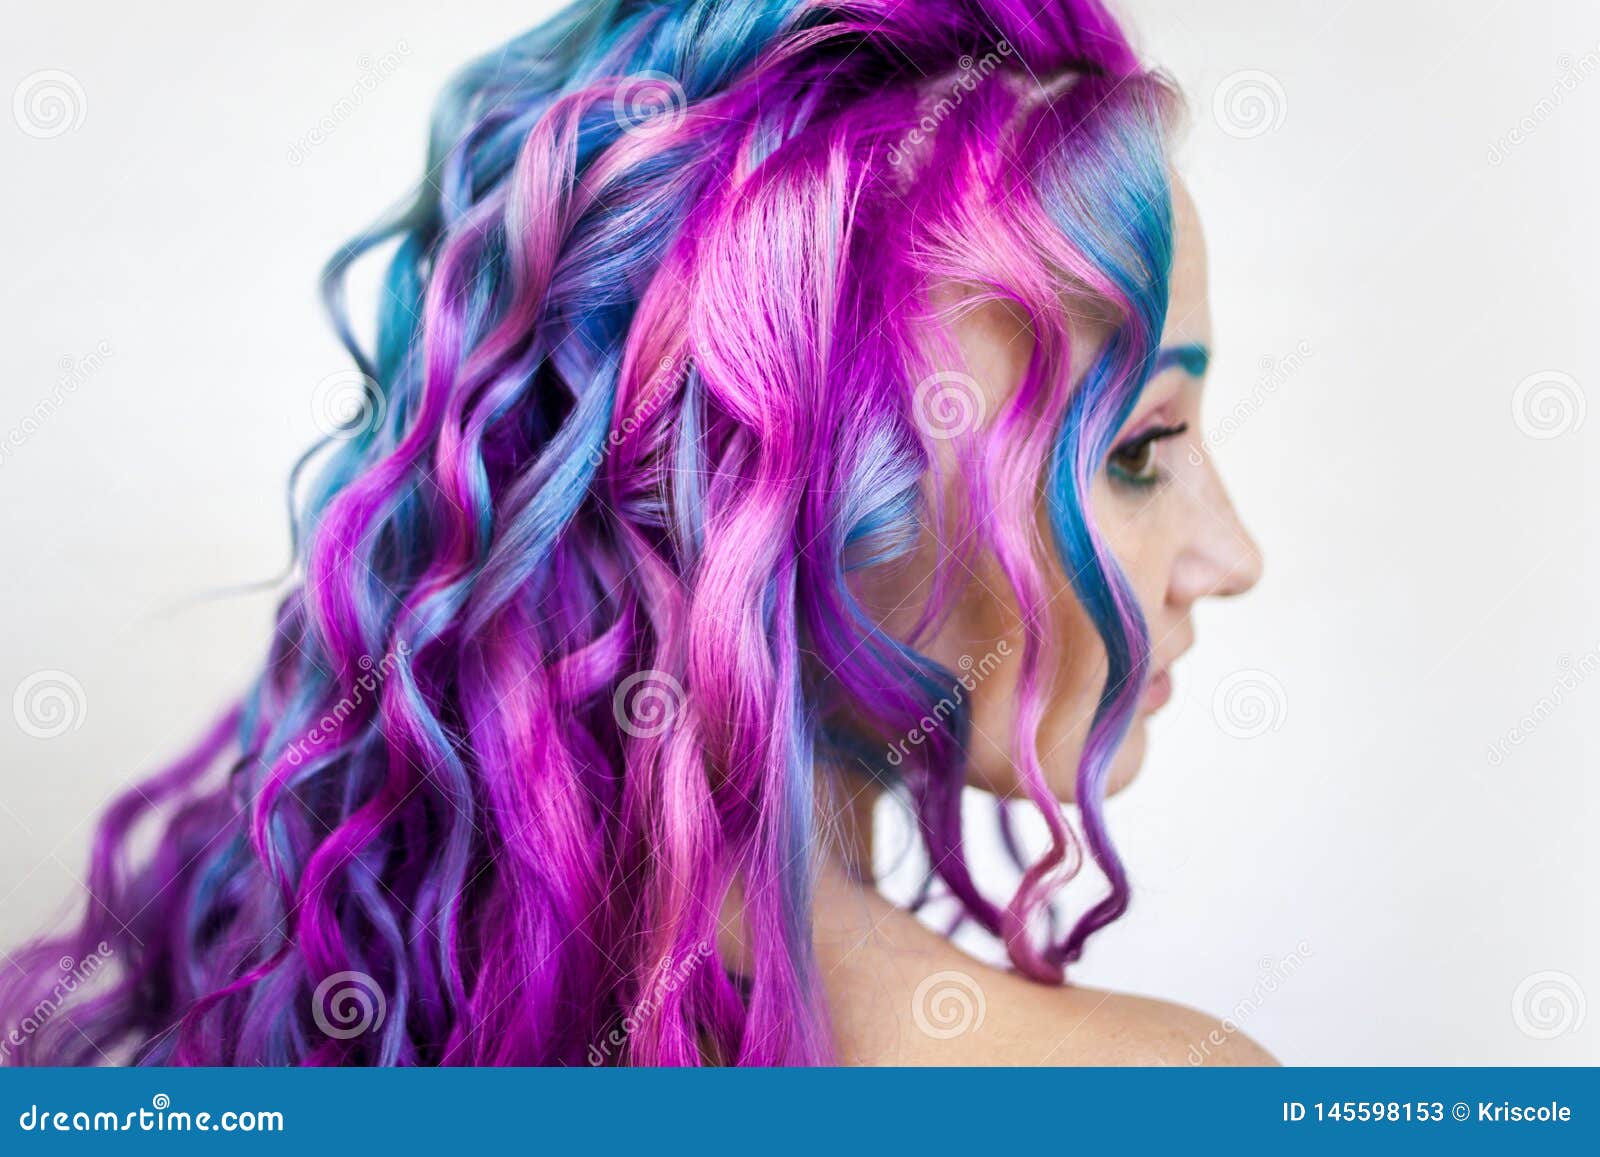 Pink and Blue Hair Extensions - wide 11